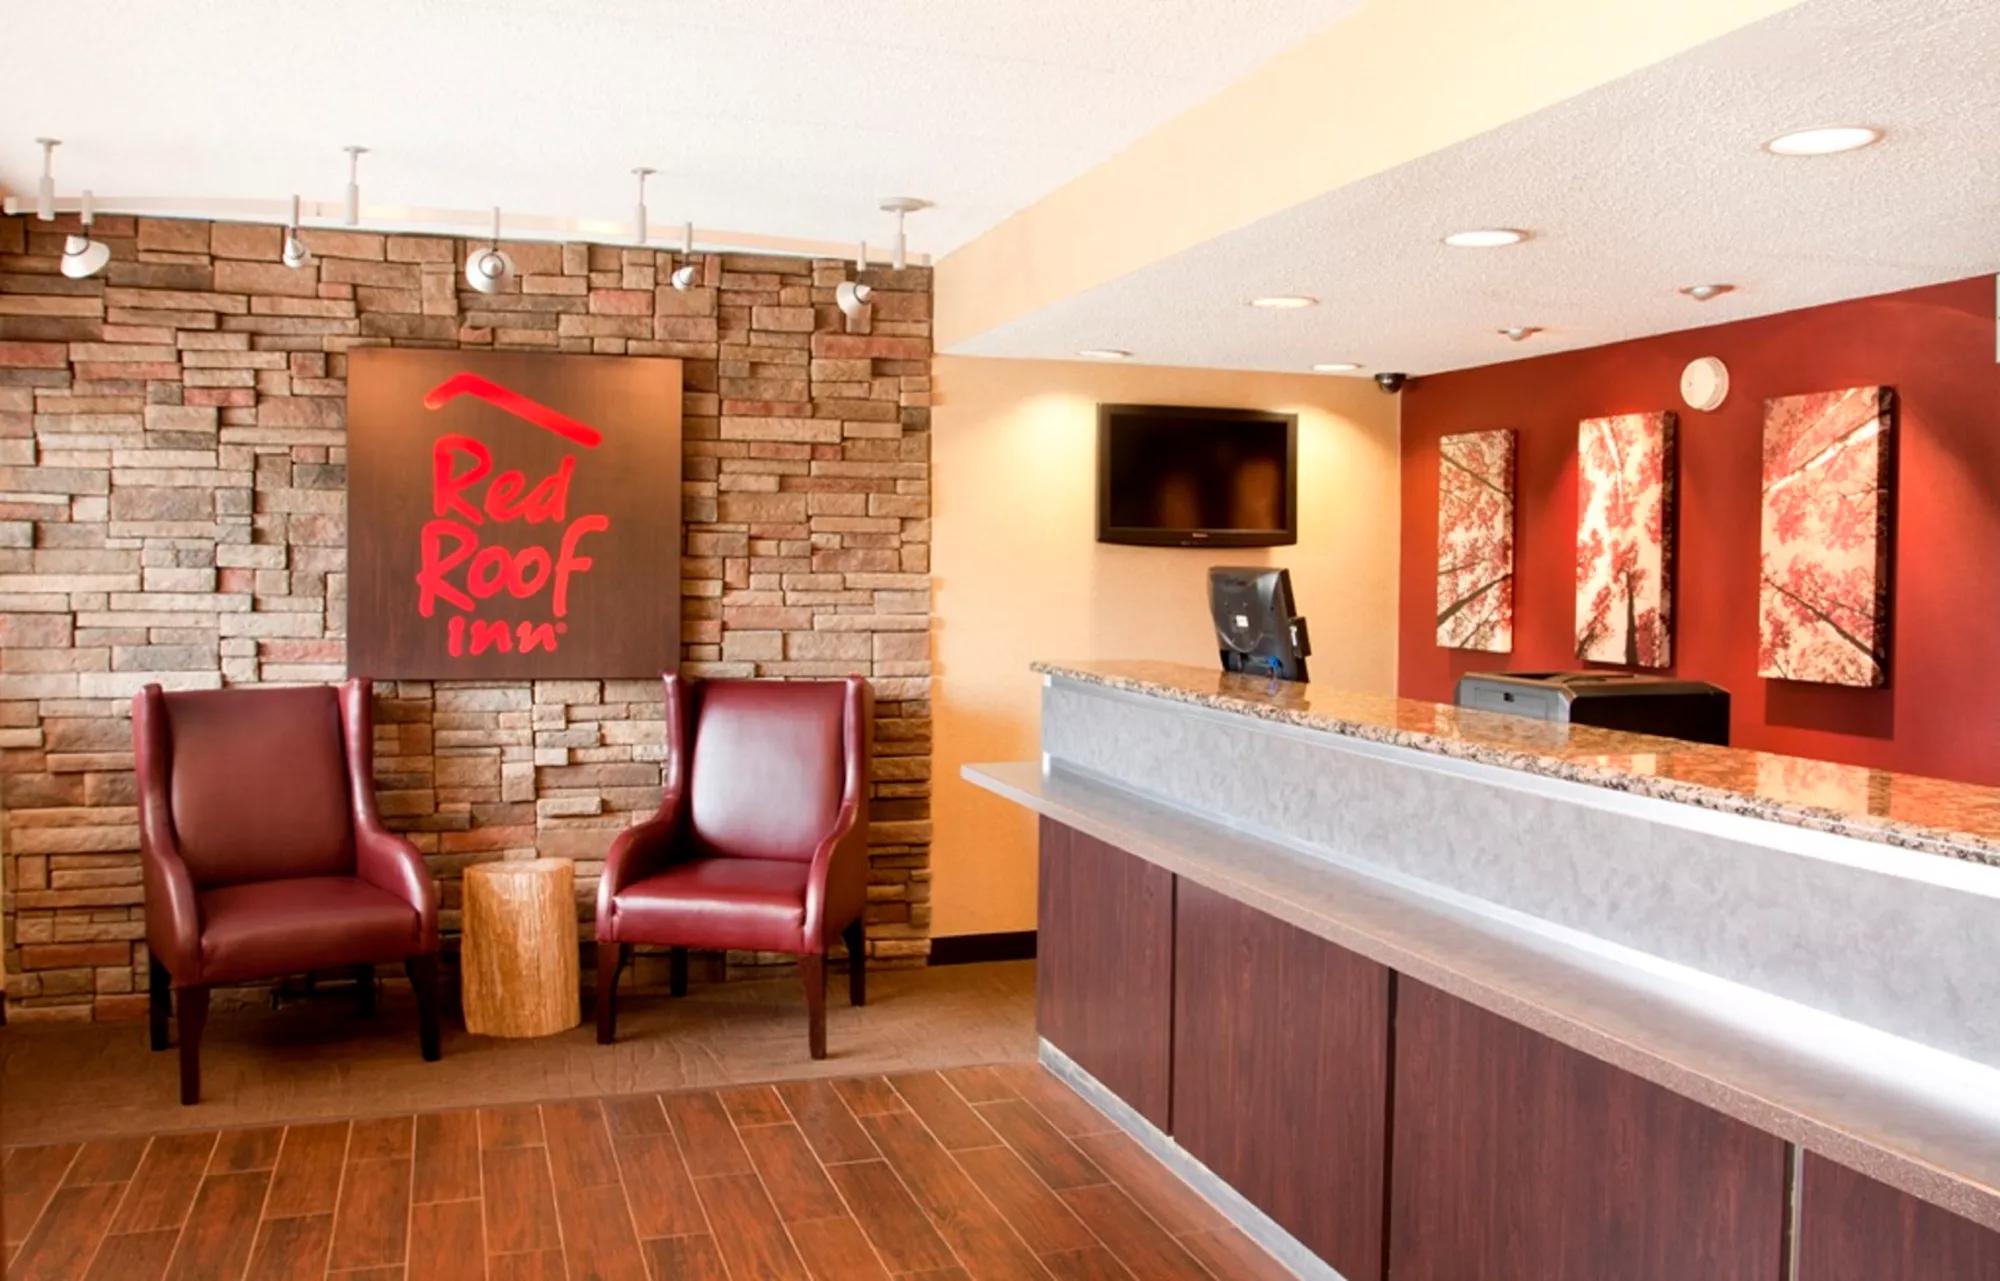 Red Roof Inn Buffalo - Niagara Airport Front Desk and Lobby Image Details